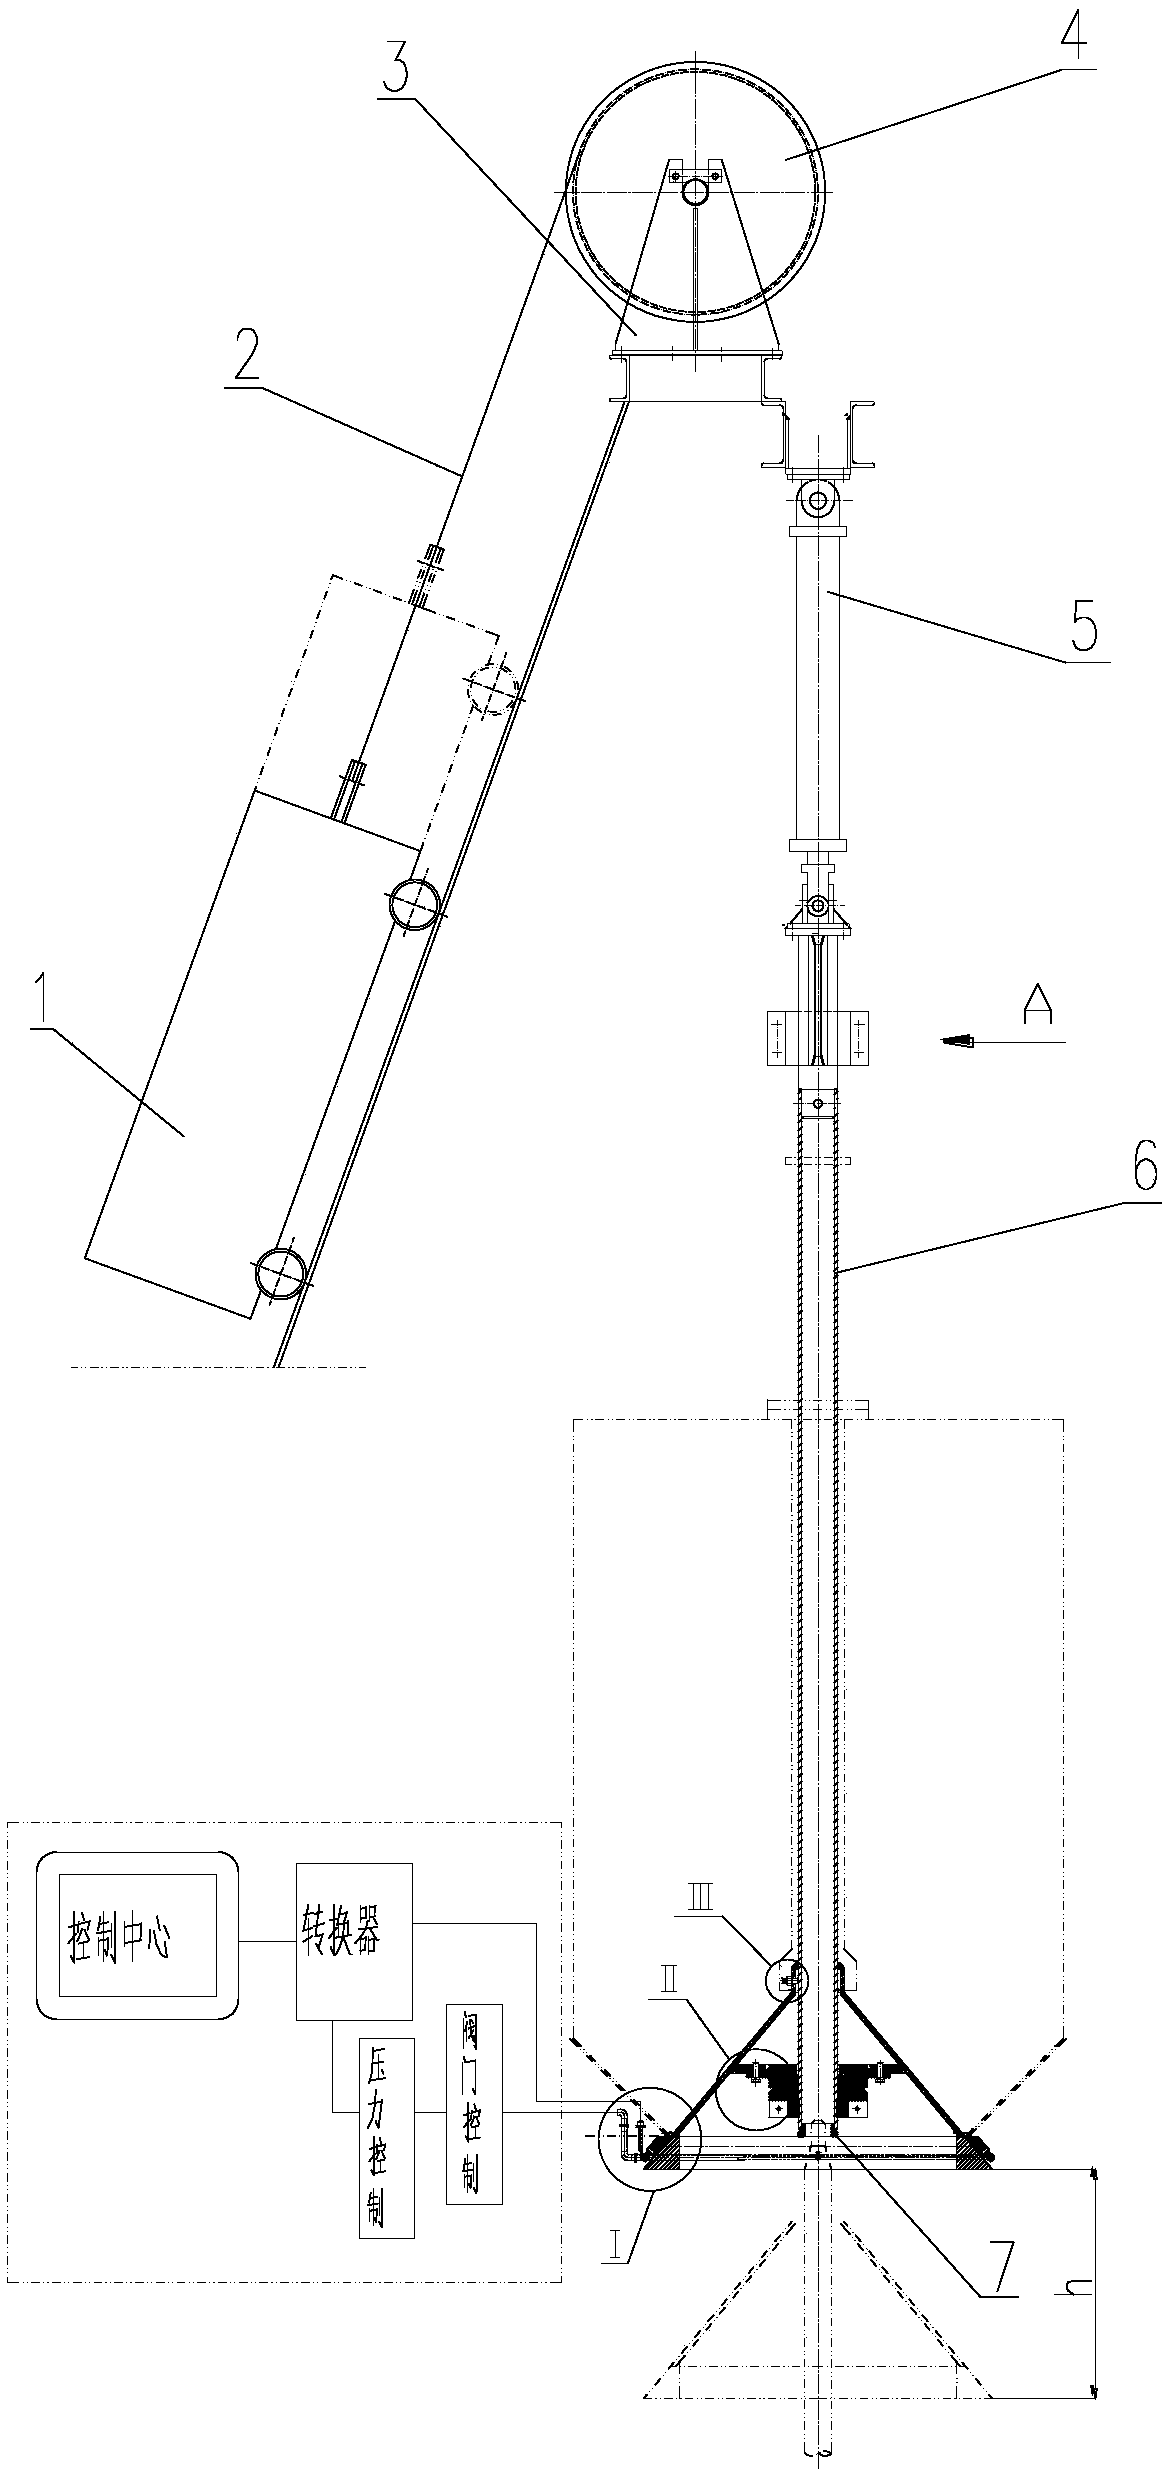 Hanger rod device for hearth charging of lime double-hearth shaft kiln